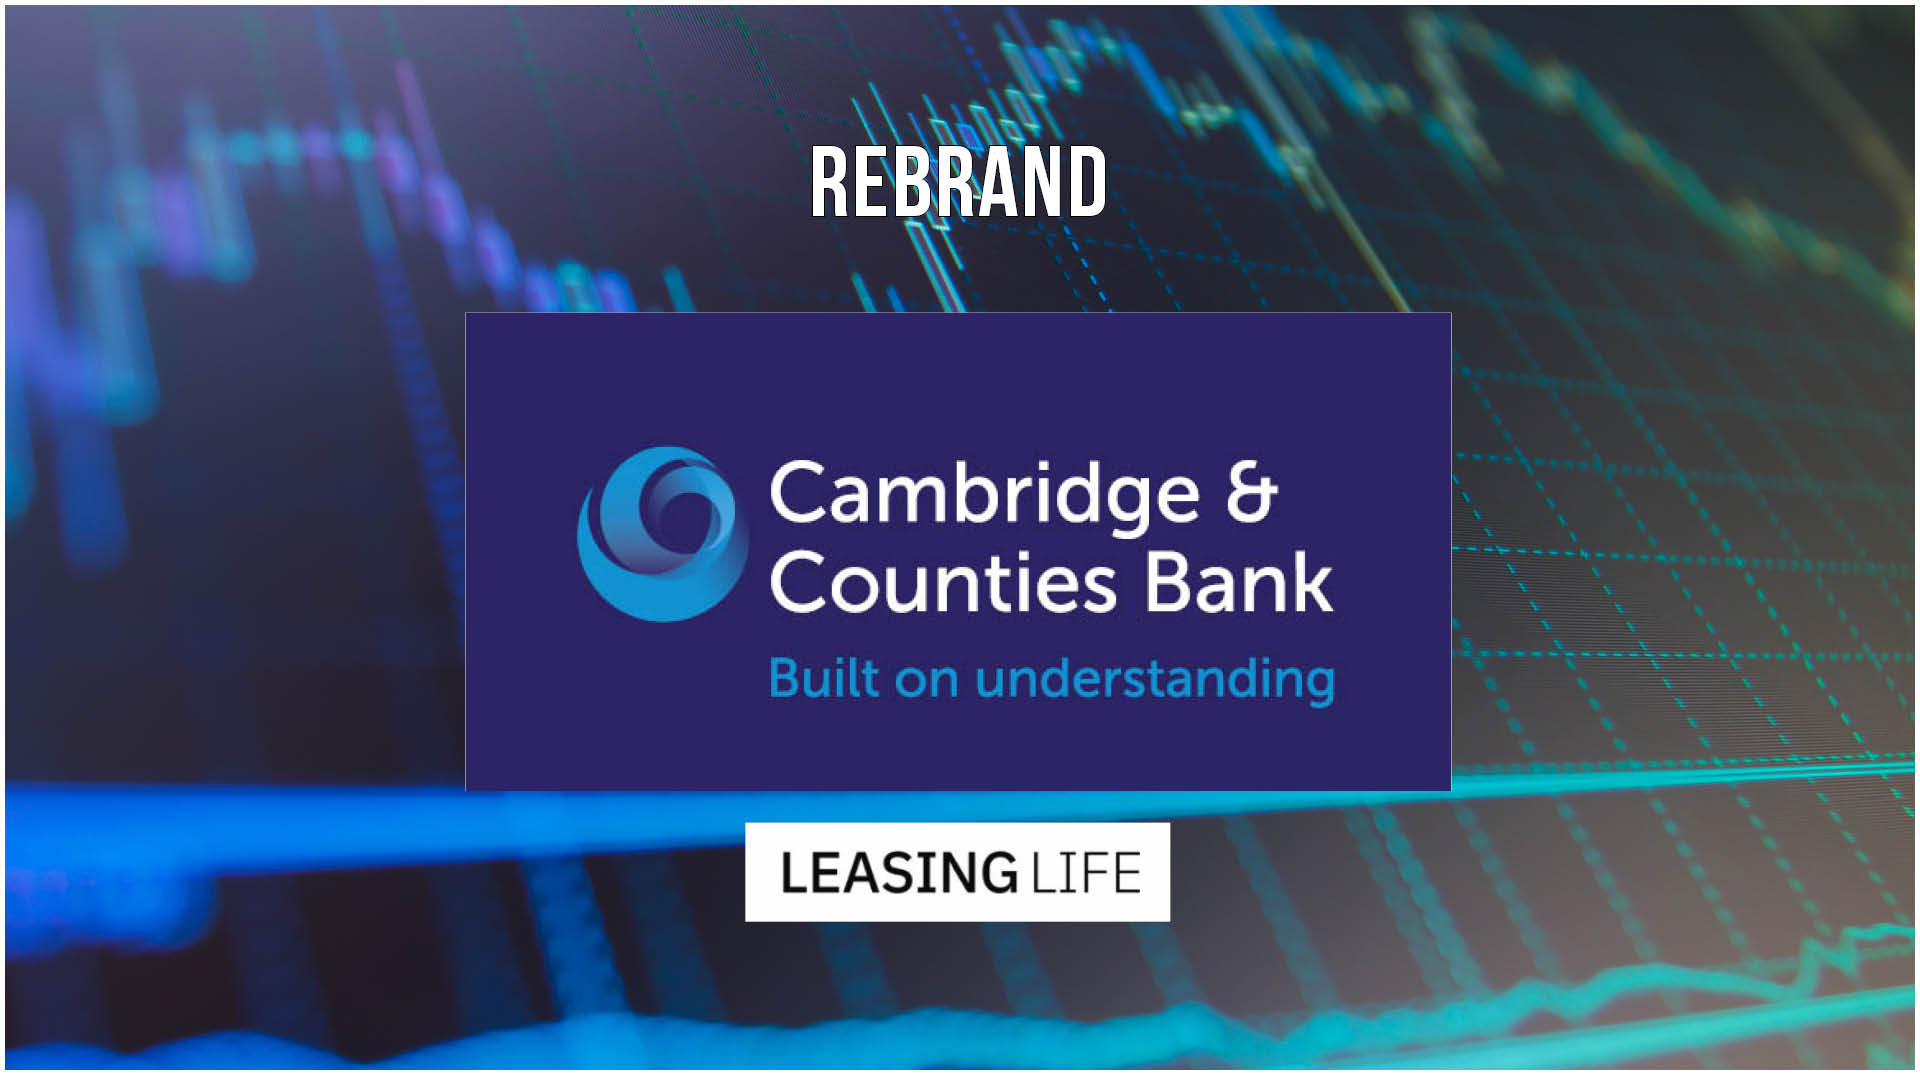 Specialist lender Cambridge & Counties Bank has completed a rebranding project. The rebrand is one of the largest in the bank’s nine-year history.